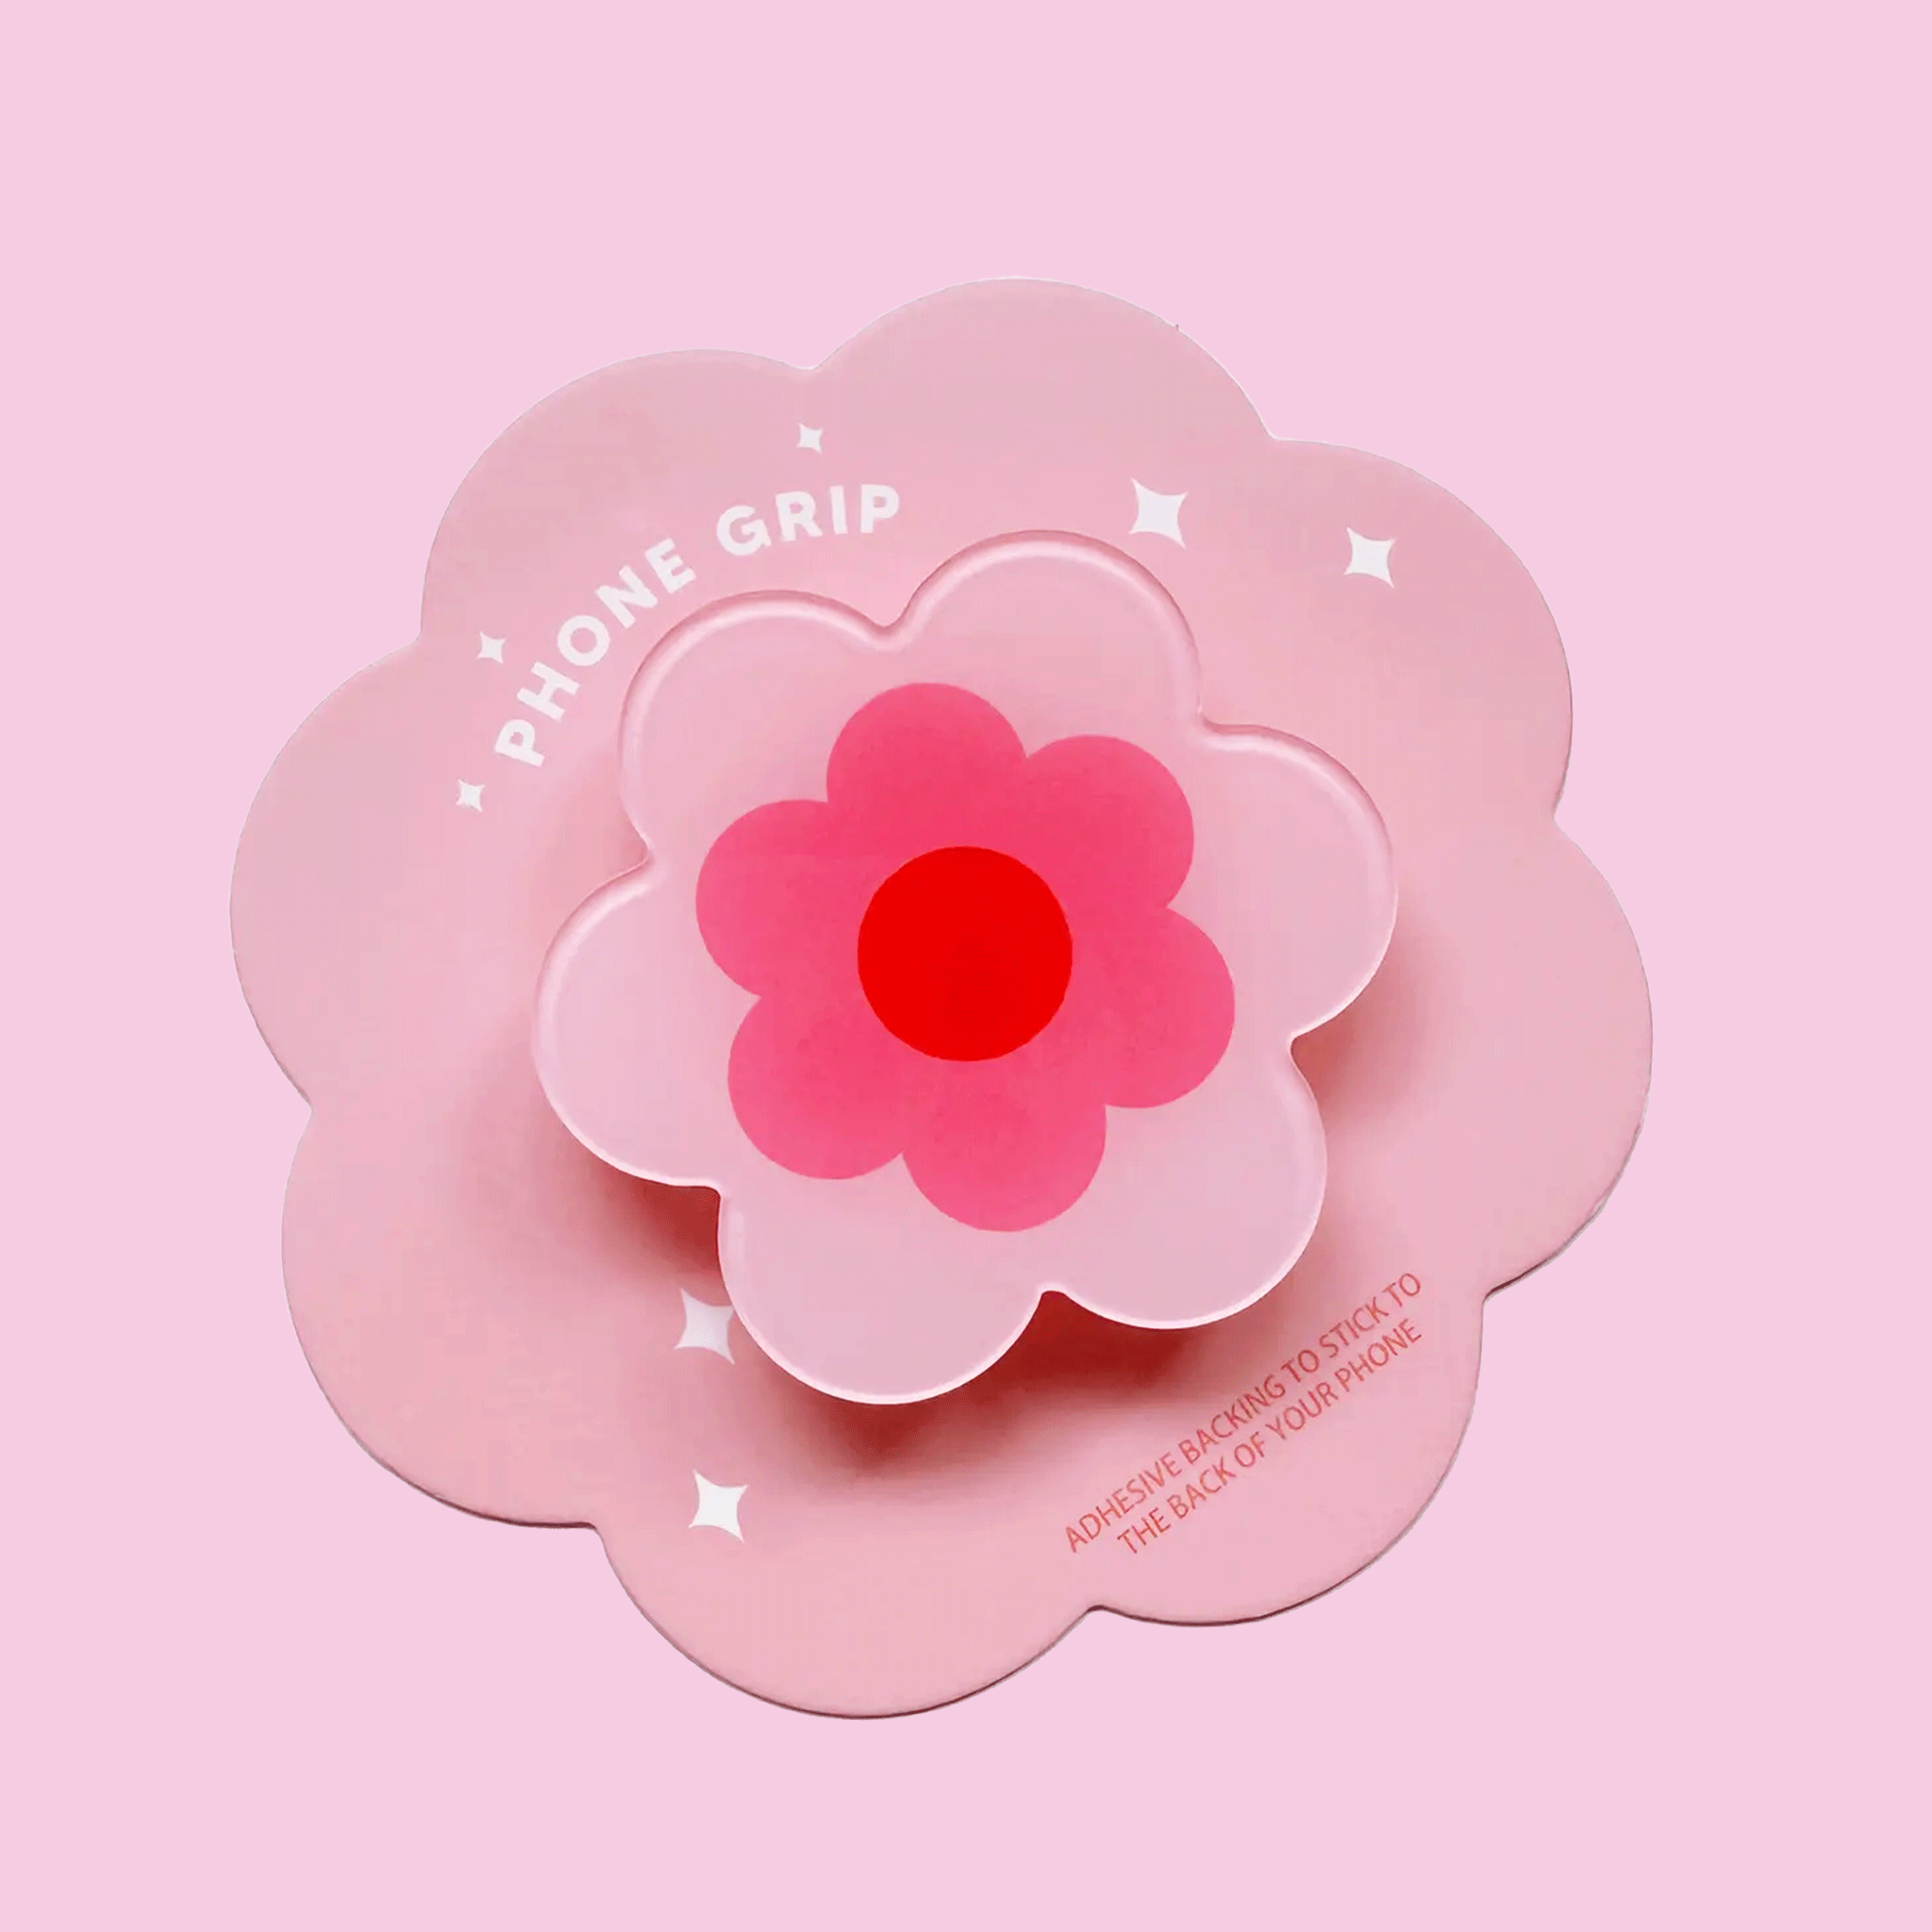 On a pink background is a pink flower shape phone grip.On a white background is a pink flower shape phone grip.